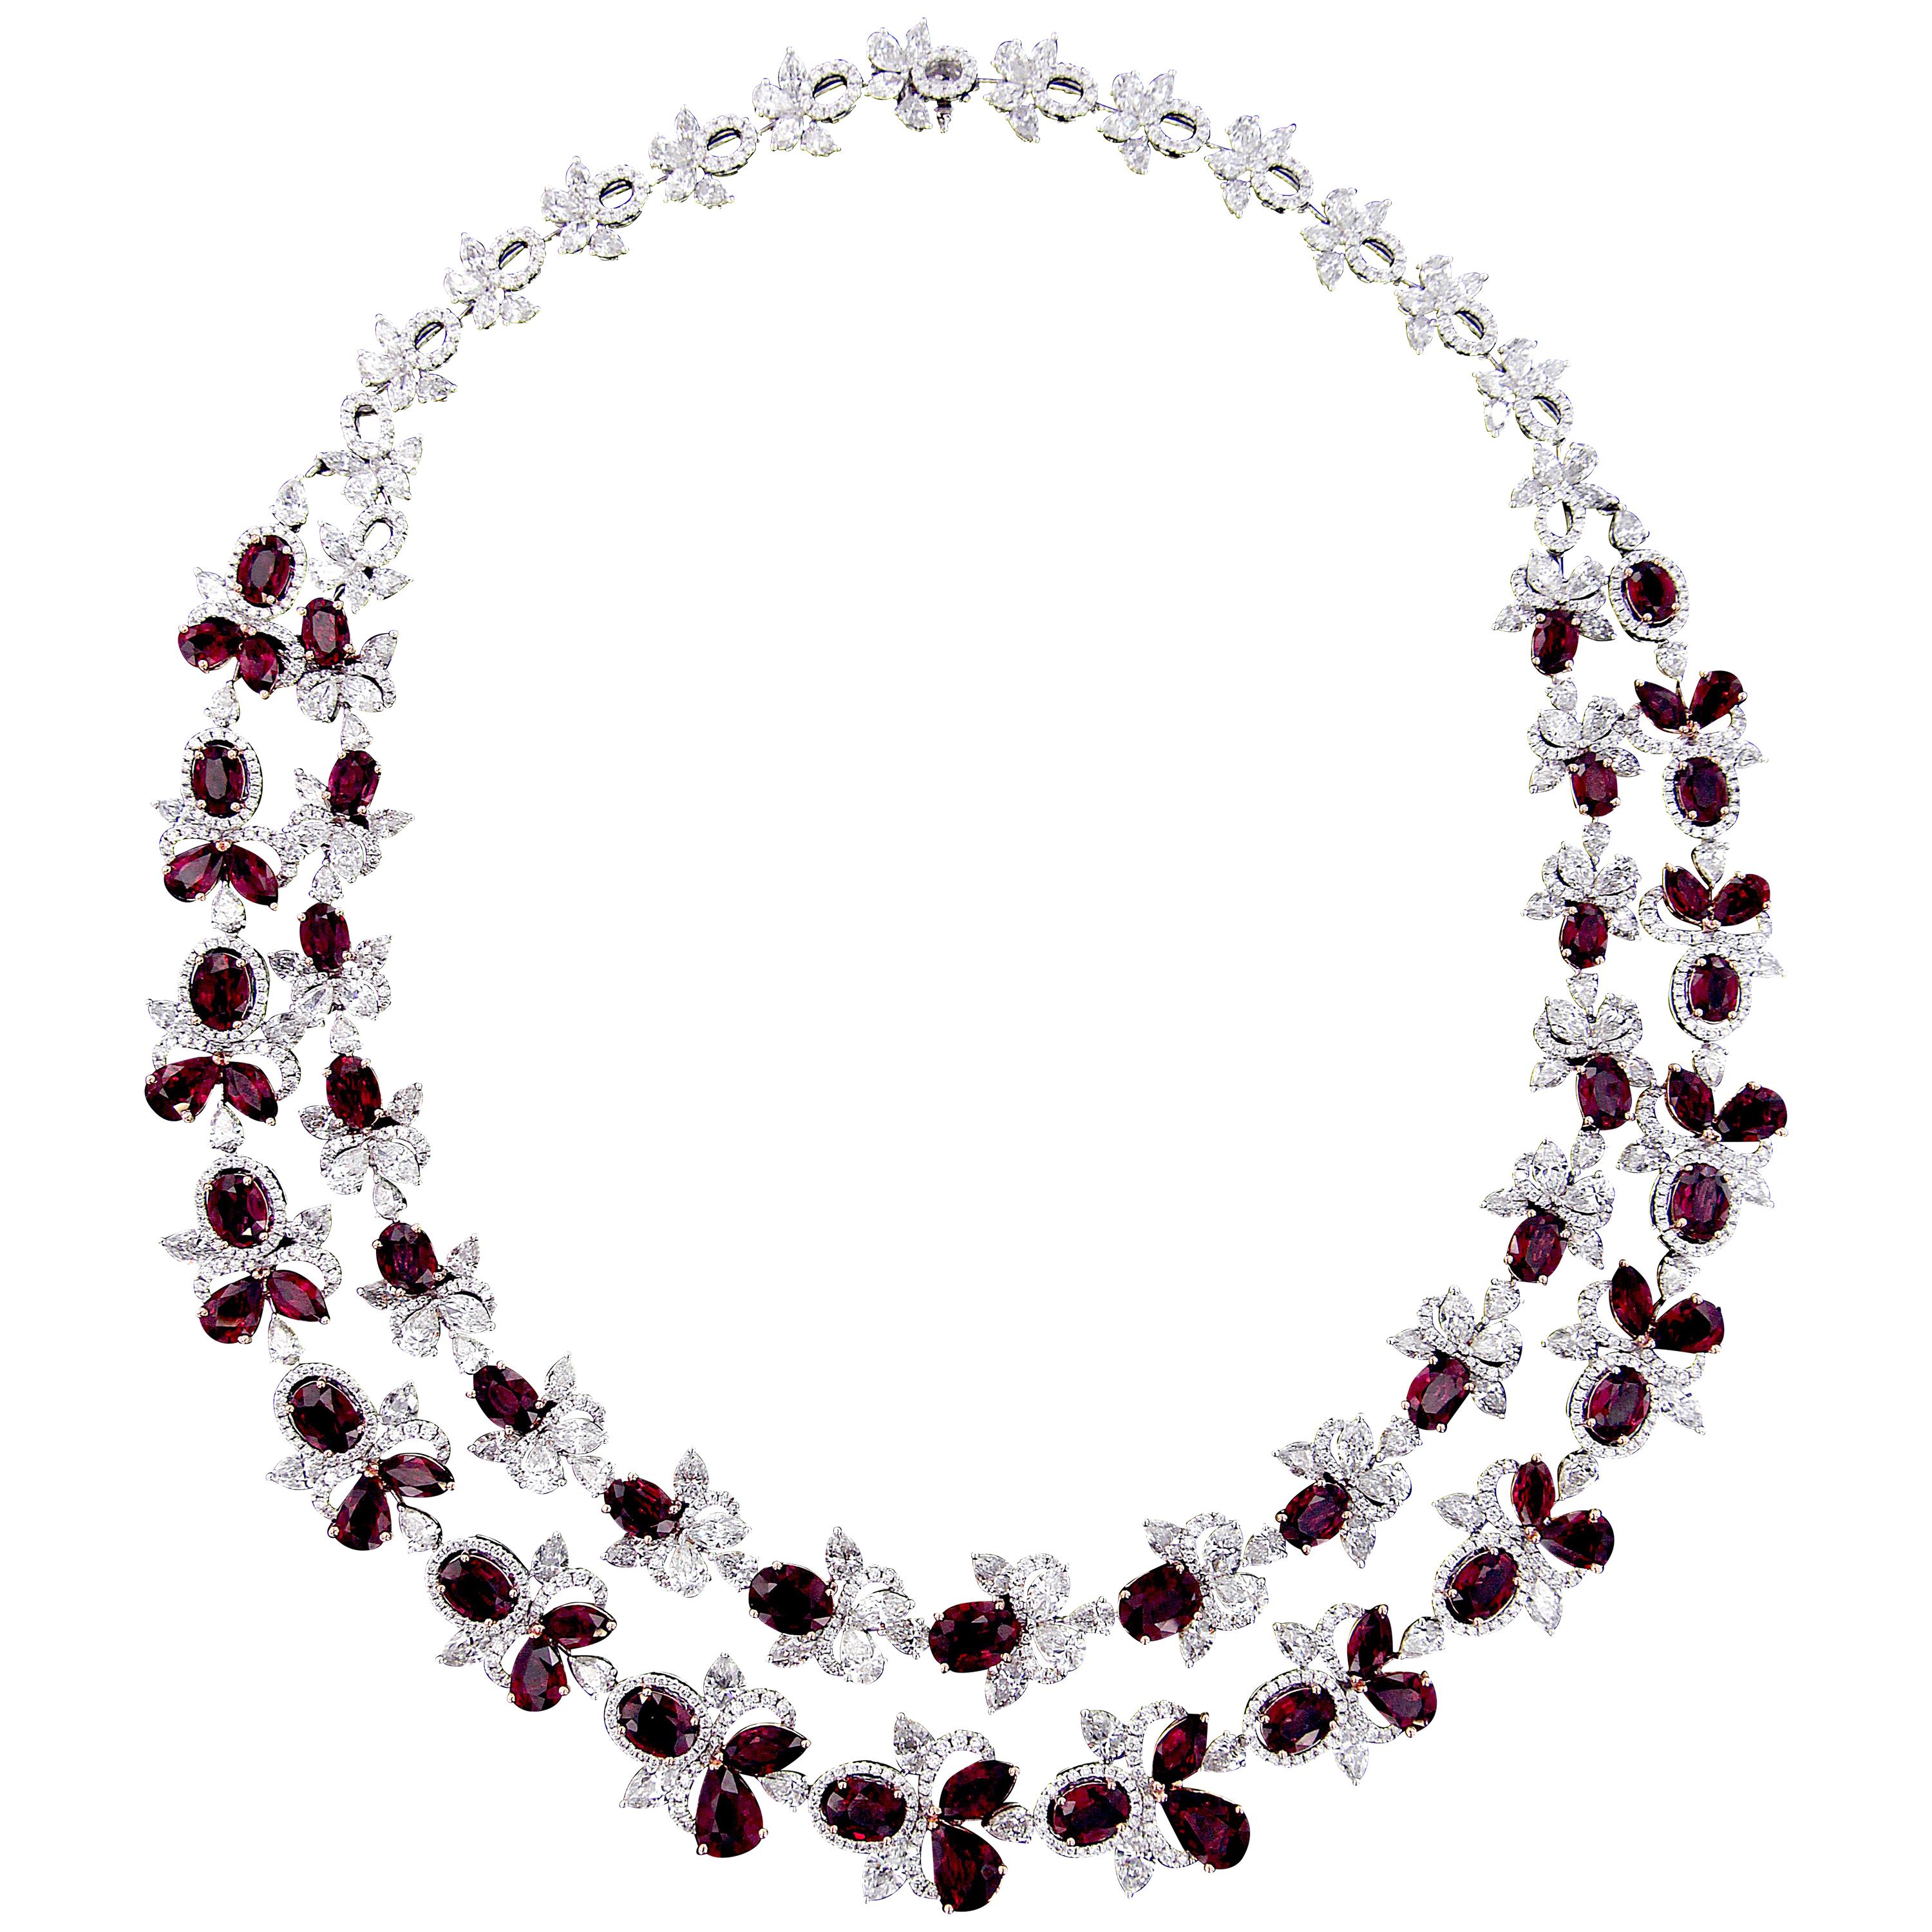 Exquisite 18 Karat White Gold, Diamonds and Ruby Necklace For Sale